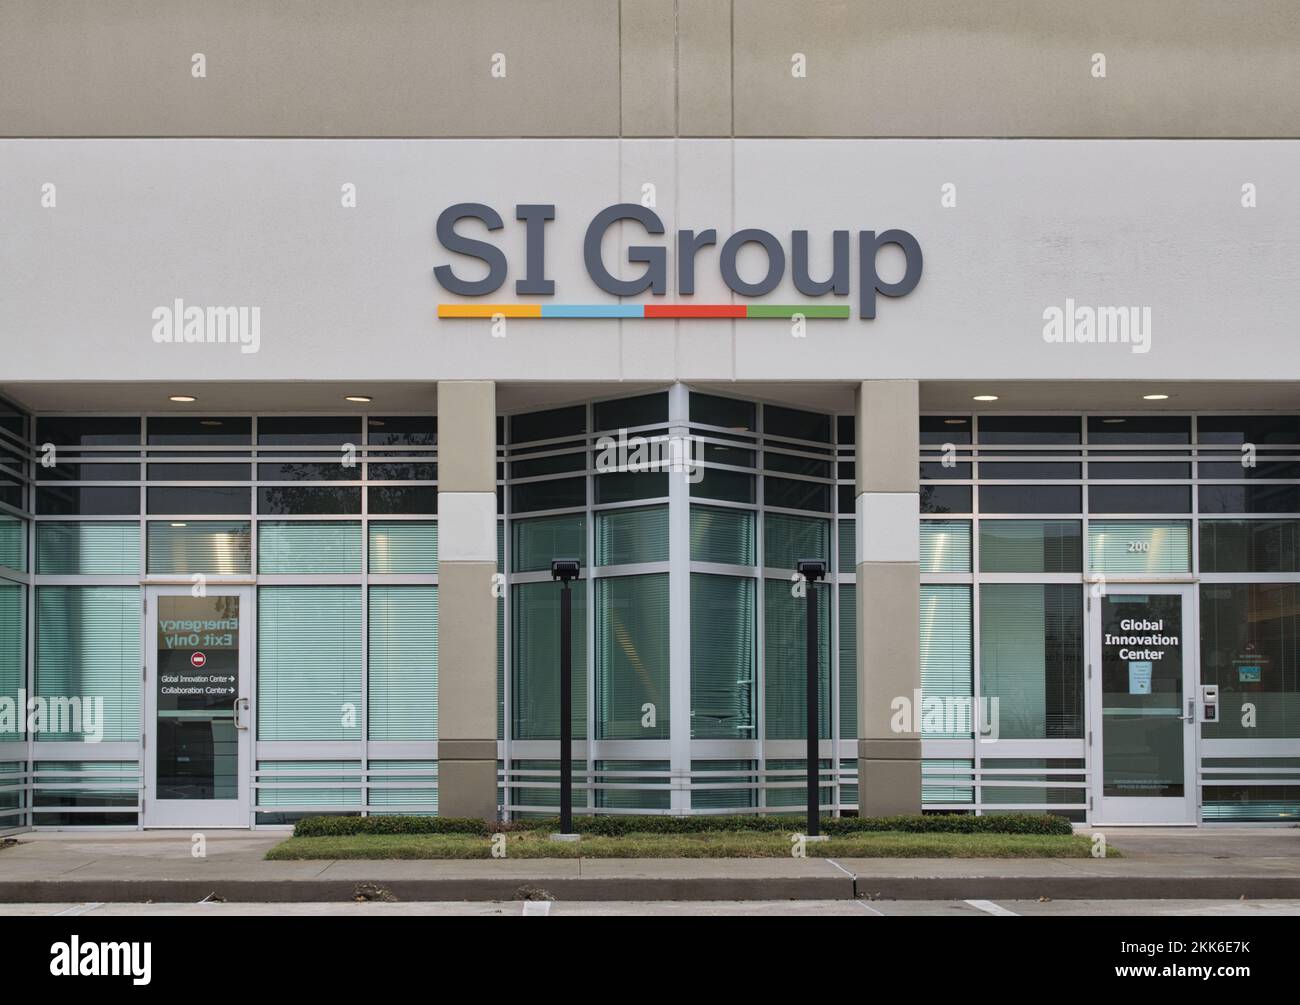 Houston, Texas USA 11-24-2022: SI Group office building exterior in Houston, TX. Developer and manufacturer of chemical and pharmaceutical products. Stock Photo